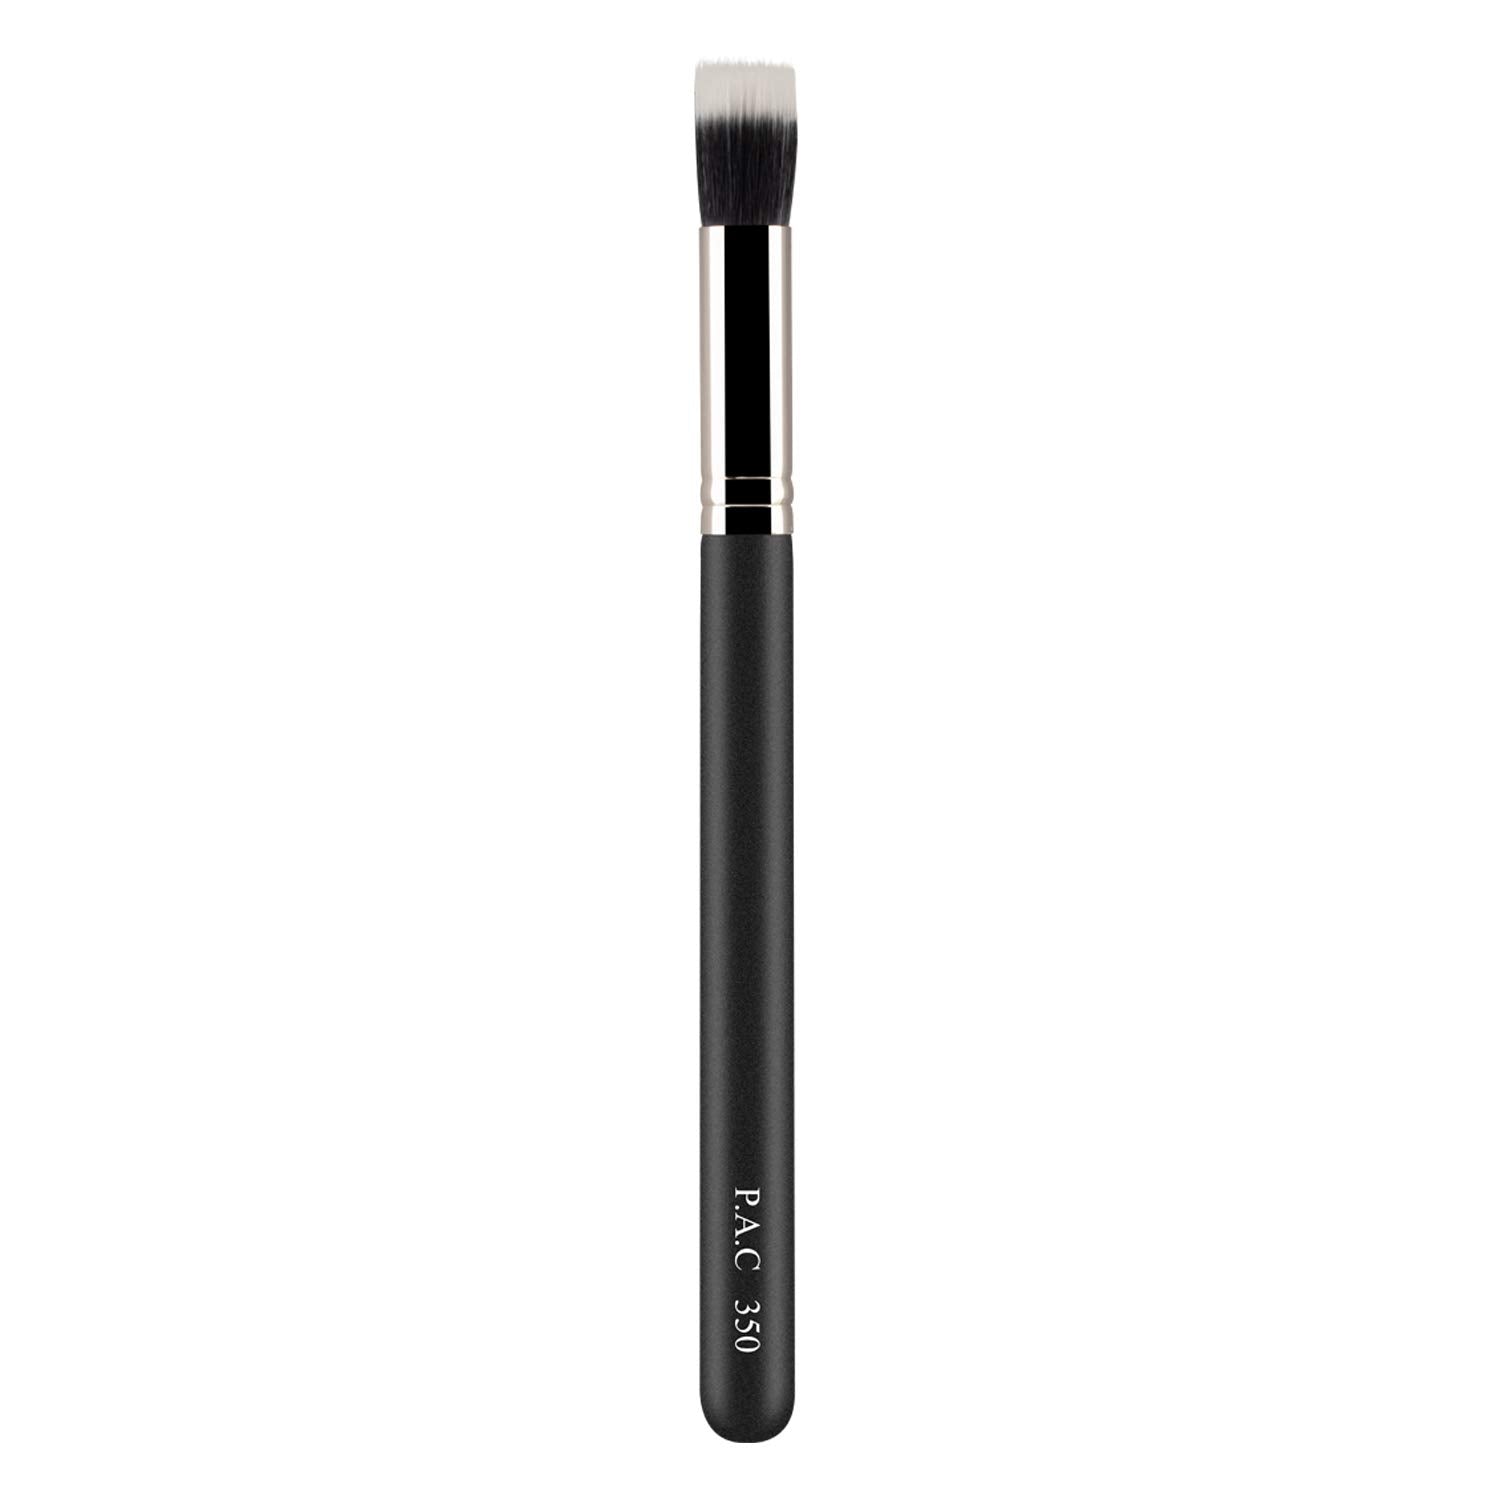 PAC Concealer Brush 350 PAC